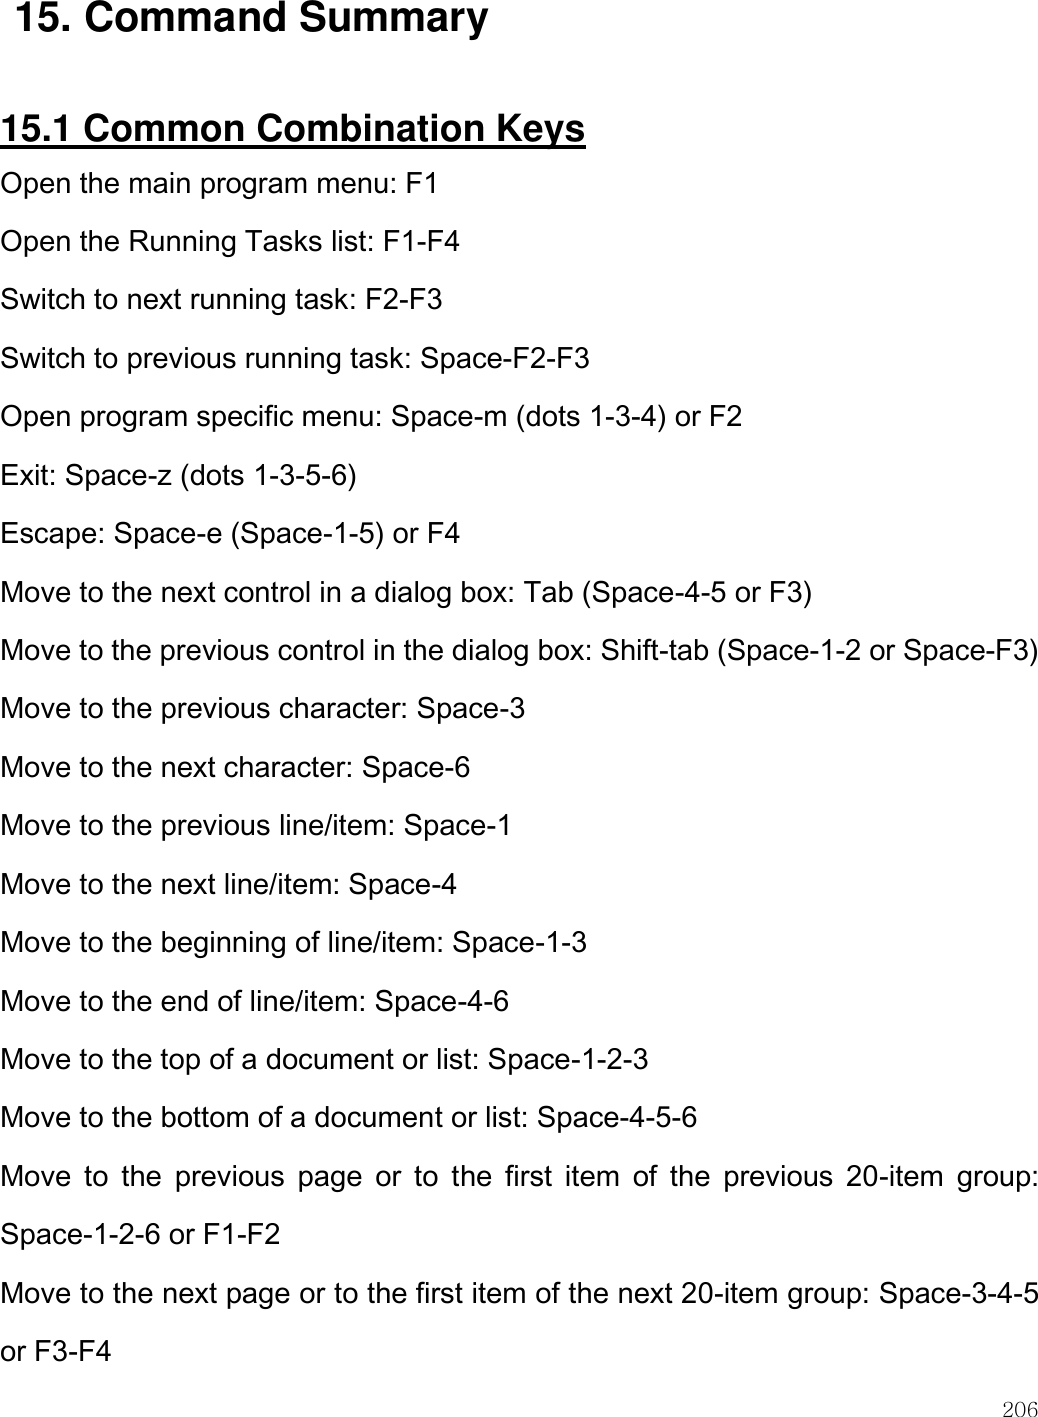    206  15. Command Summary  15.1 Common Combination Keys Open the main program menu: F1 Open the Running Tasks list: F1-F4 Switch to next running task: F2-F3 Switch to previous running task: Space-F2-F3 Open program specific menu: Space-m (dots 1-3-4) or F2 Exit: Space-z (dots 1-3-5-6) Escape: Space-e (Space-1-5) or F4 Move to the next control in a dialog box: Tab (Space-4-5 or F3) Move to the previous control in the dialog box: Shift-tab (Space-1-2 or Space-F3) Move to the previous character: Space-3 Move to the next character: Space-6 Move to the previous line/item: Space-1 Move to the next line/item: Space-4 Move to the beginning of line/item: Space-1-3  Move to the end of line/item: Space-4-6  Move to the top of a document or list: Space-1-2-3  Move to the bottom of a document or list: Space-4-5-6  Move  to  the  previous  page  or  to  the  first  item  of  the  previous  20-item  group: Space-1-2-6 or F1-F2 Move to the next page or to the first item of the next 20-item group: Space-3-4-5 or F3-F4 